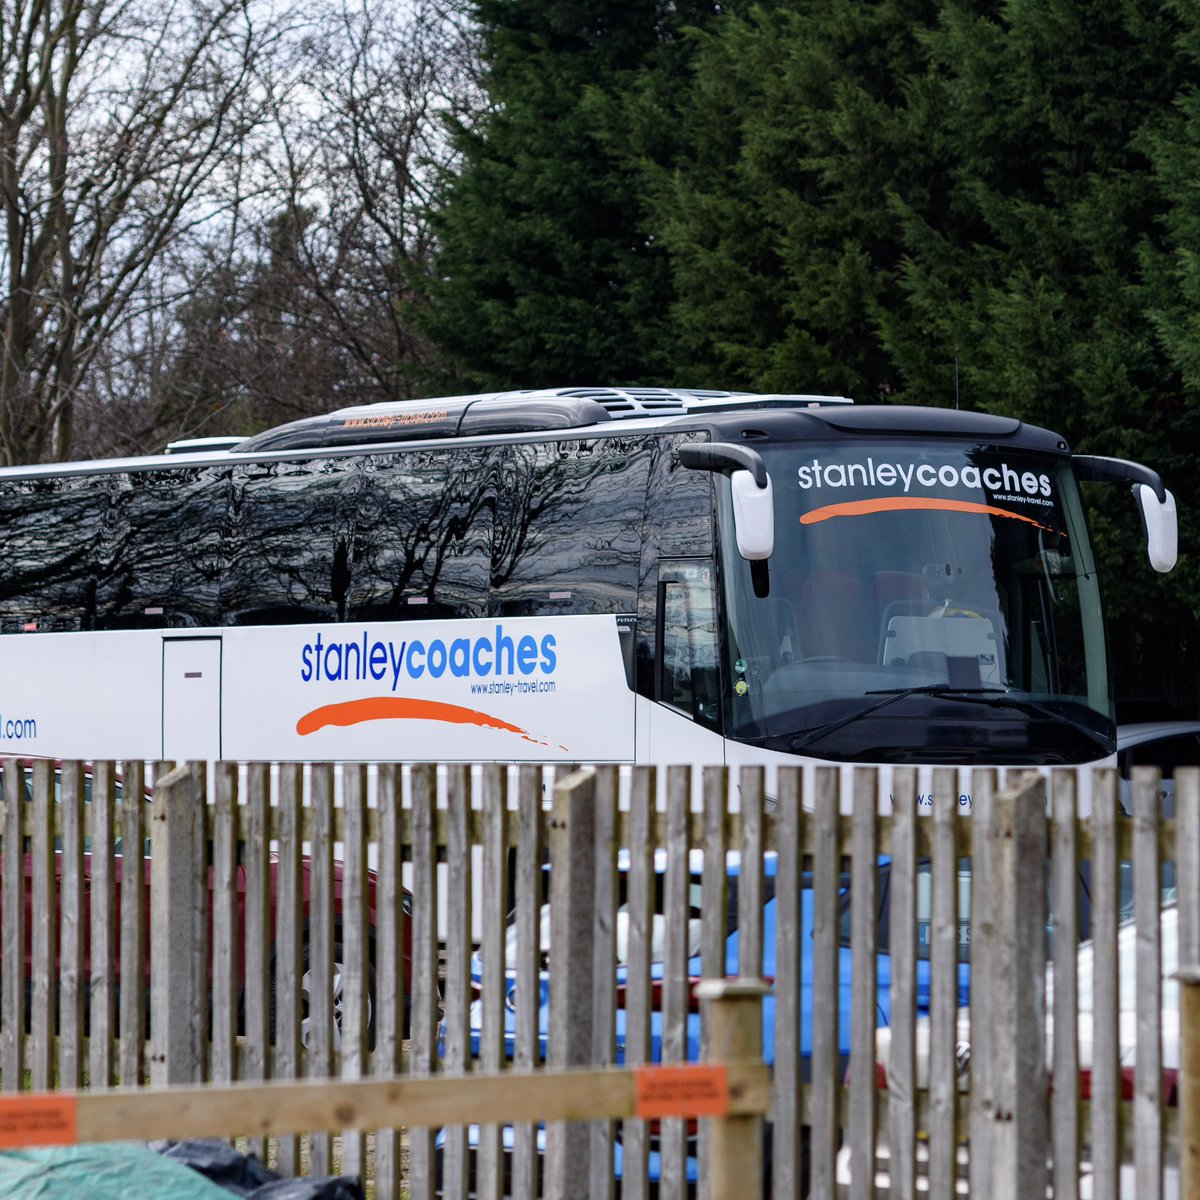 🚍 𝗔𝗪𝗔𝗬 𝗧𝗥𝗔𝗩𝗘𝗟 🚍 The coach to Carlton for our penultimate game of the league season will depart The UTS Stadium at 2:45pm on Tuesday. 📲 Contact 07724392049 to book. It is £10 per head. 📸 @treecrashkelv | #WeAreDUTS 💙